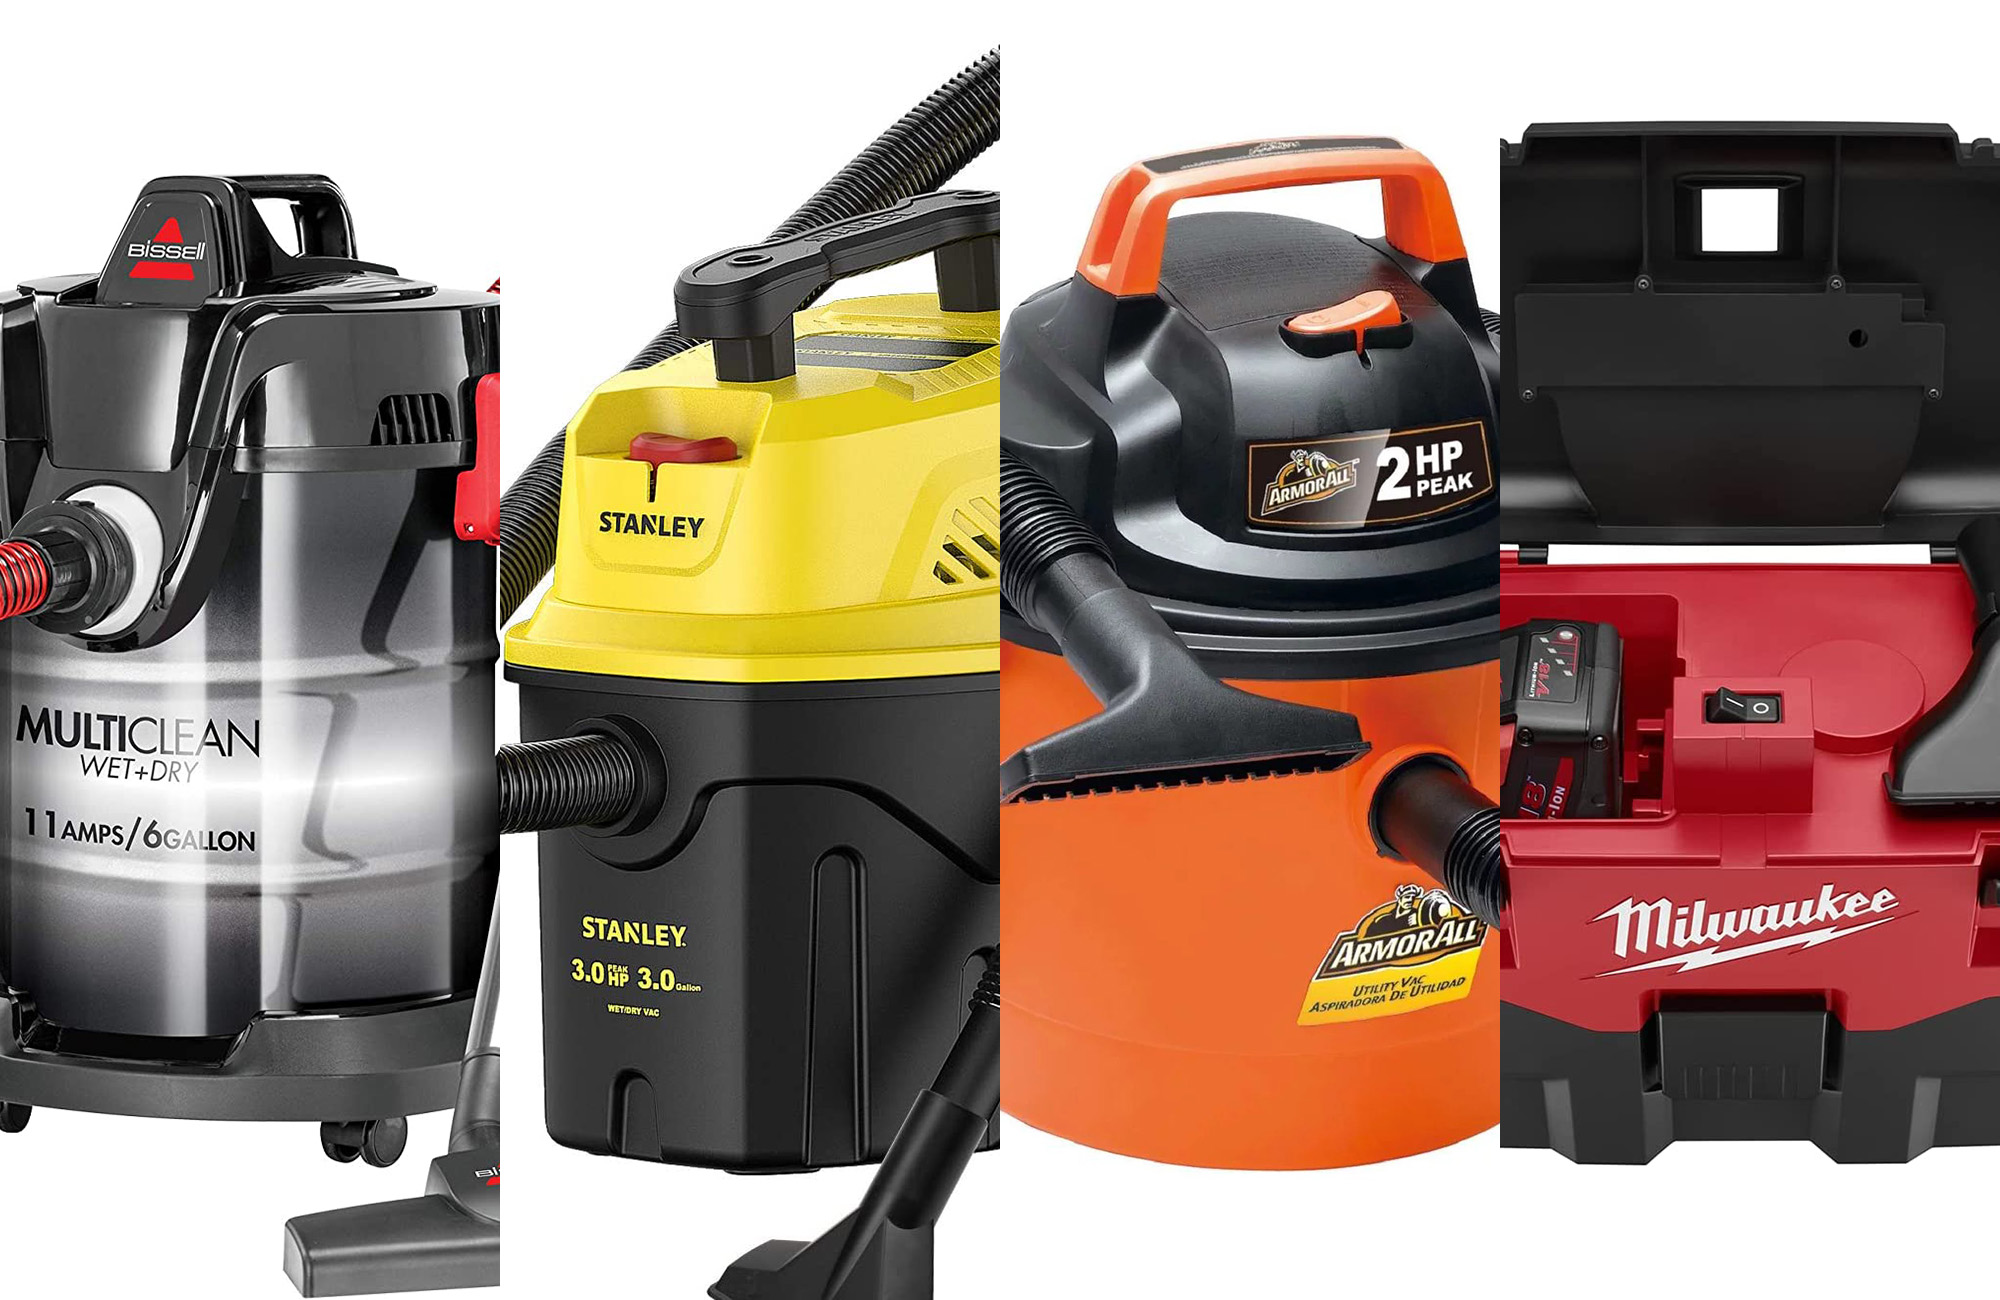 The Best Heavy-Duty Vacuum Cleaner, Built to Last